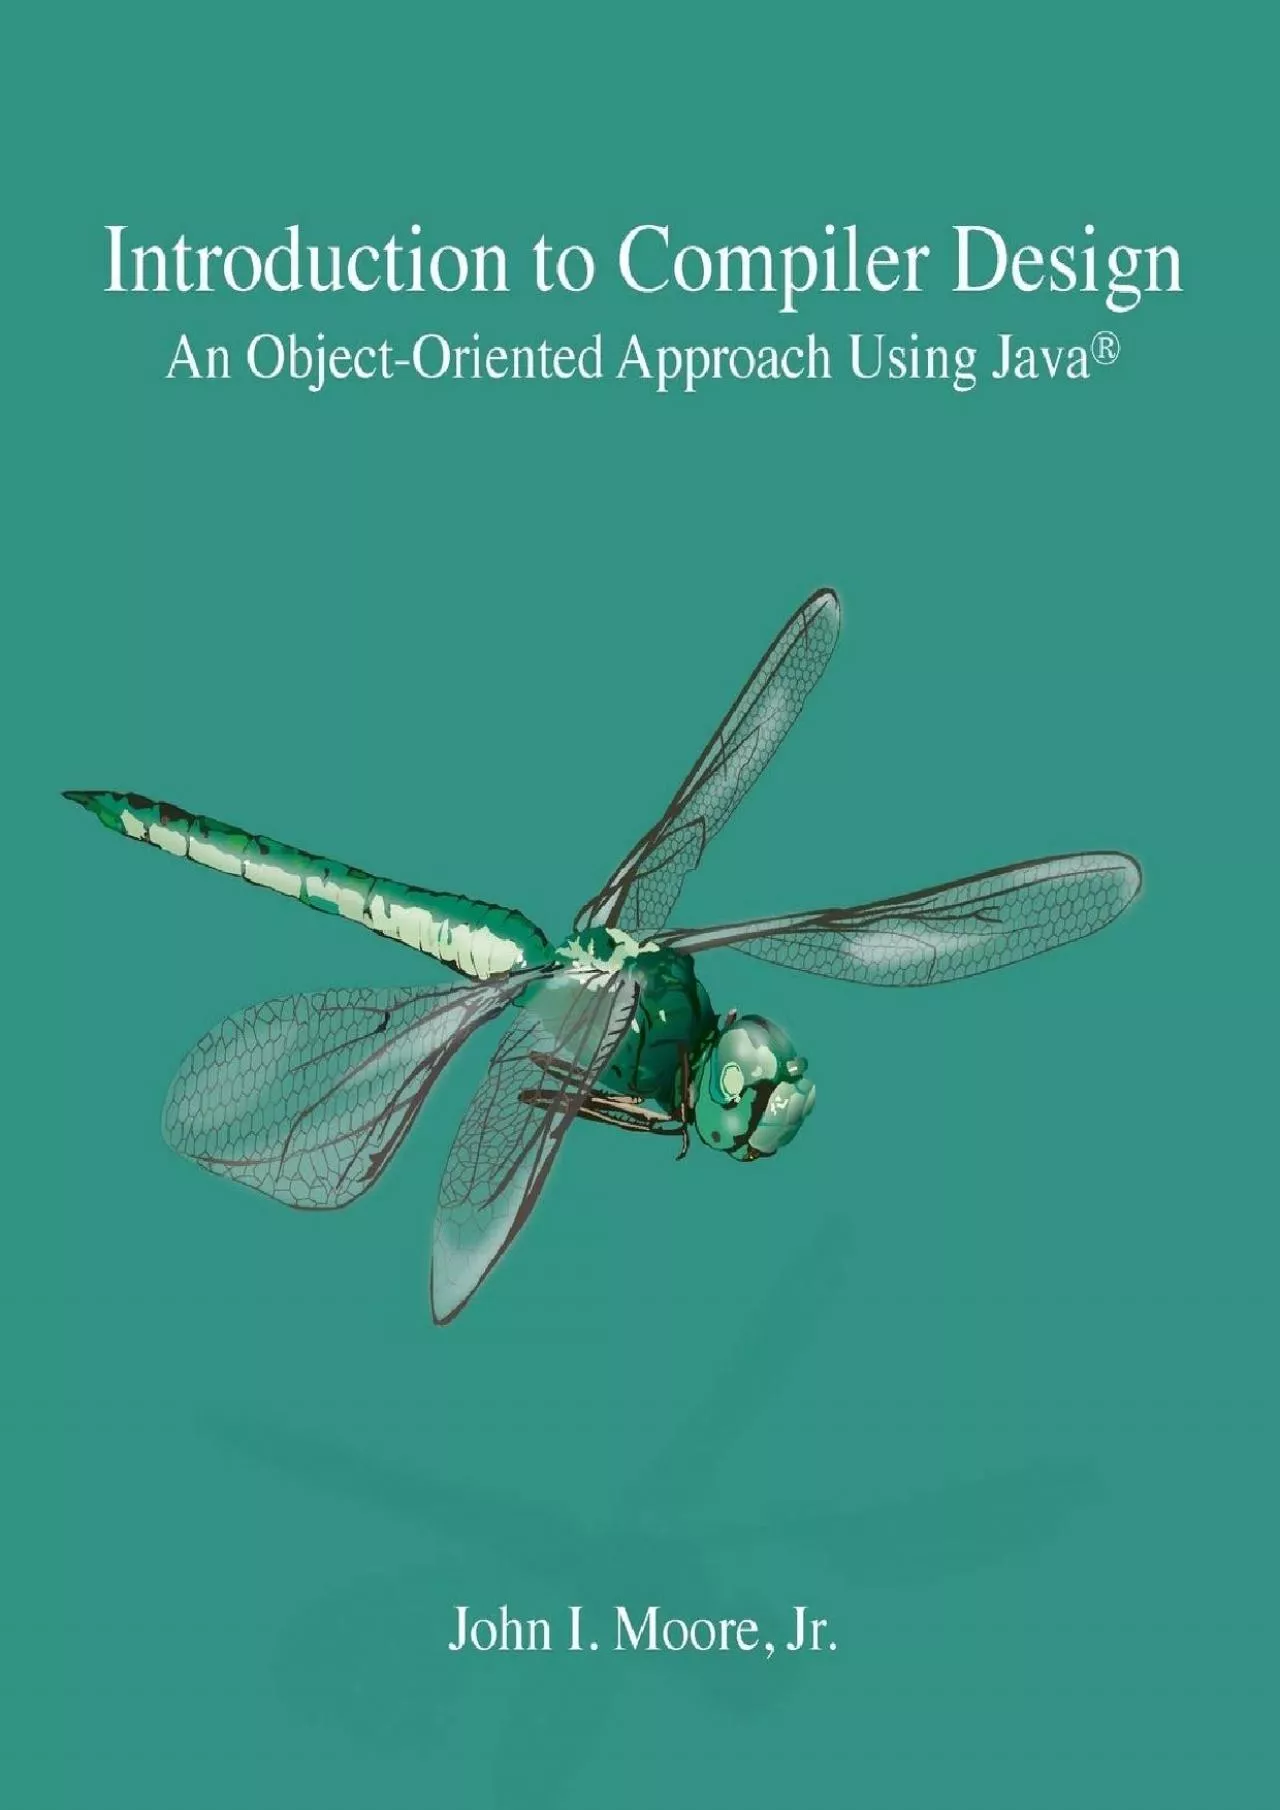 [eBOOK]-Introduction to Compiler Design: An Object-Oriented Approach Using Java(R)